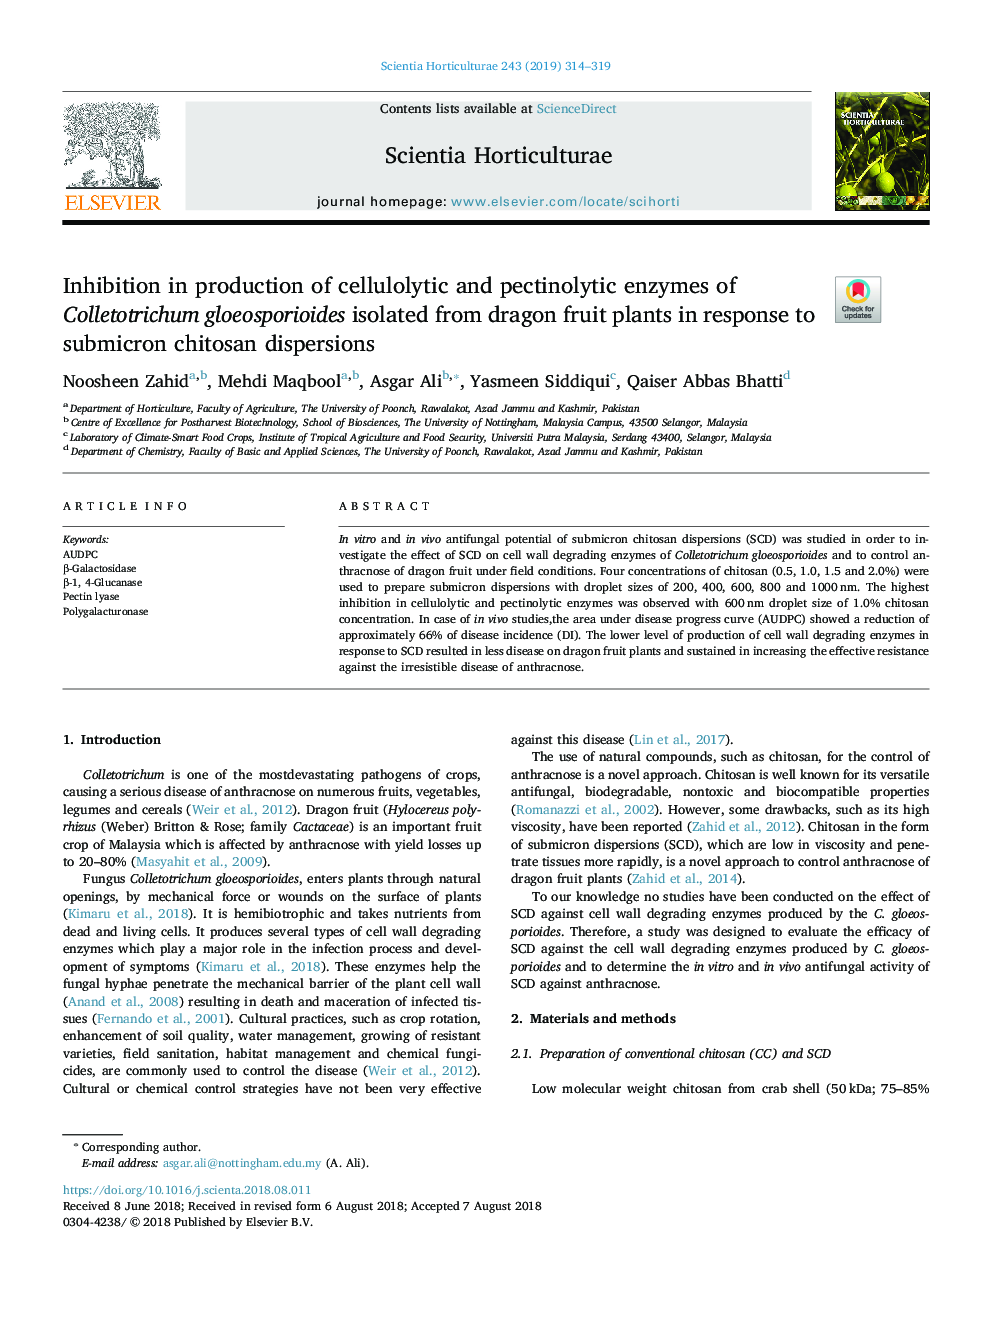 Inhibition in production of cellulolytic and pectinolytic enzymes of Colletotrichum gloeosporioides isolated from dragon fruit plants in response to submicron chitosan dispersions